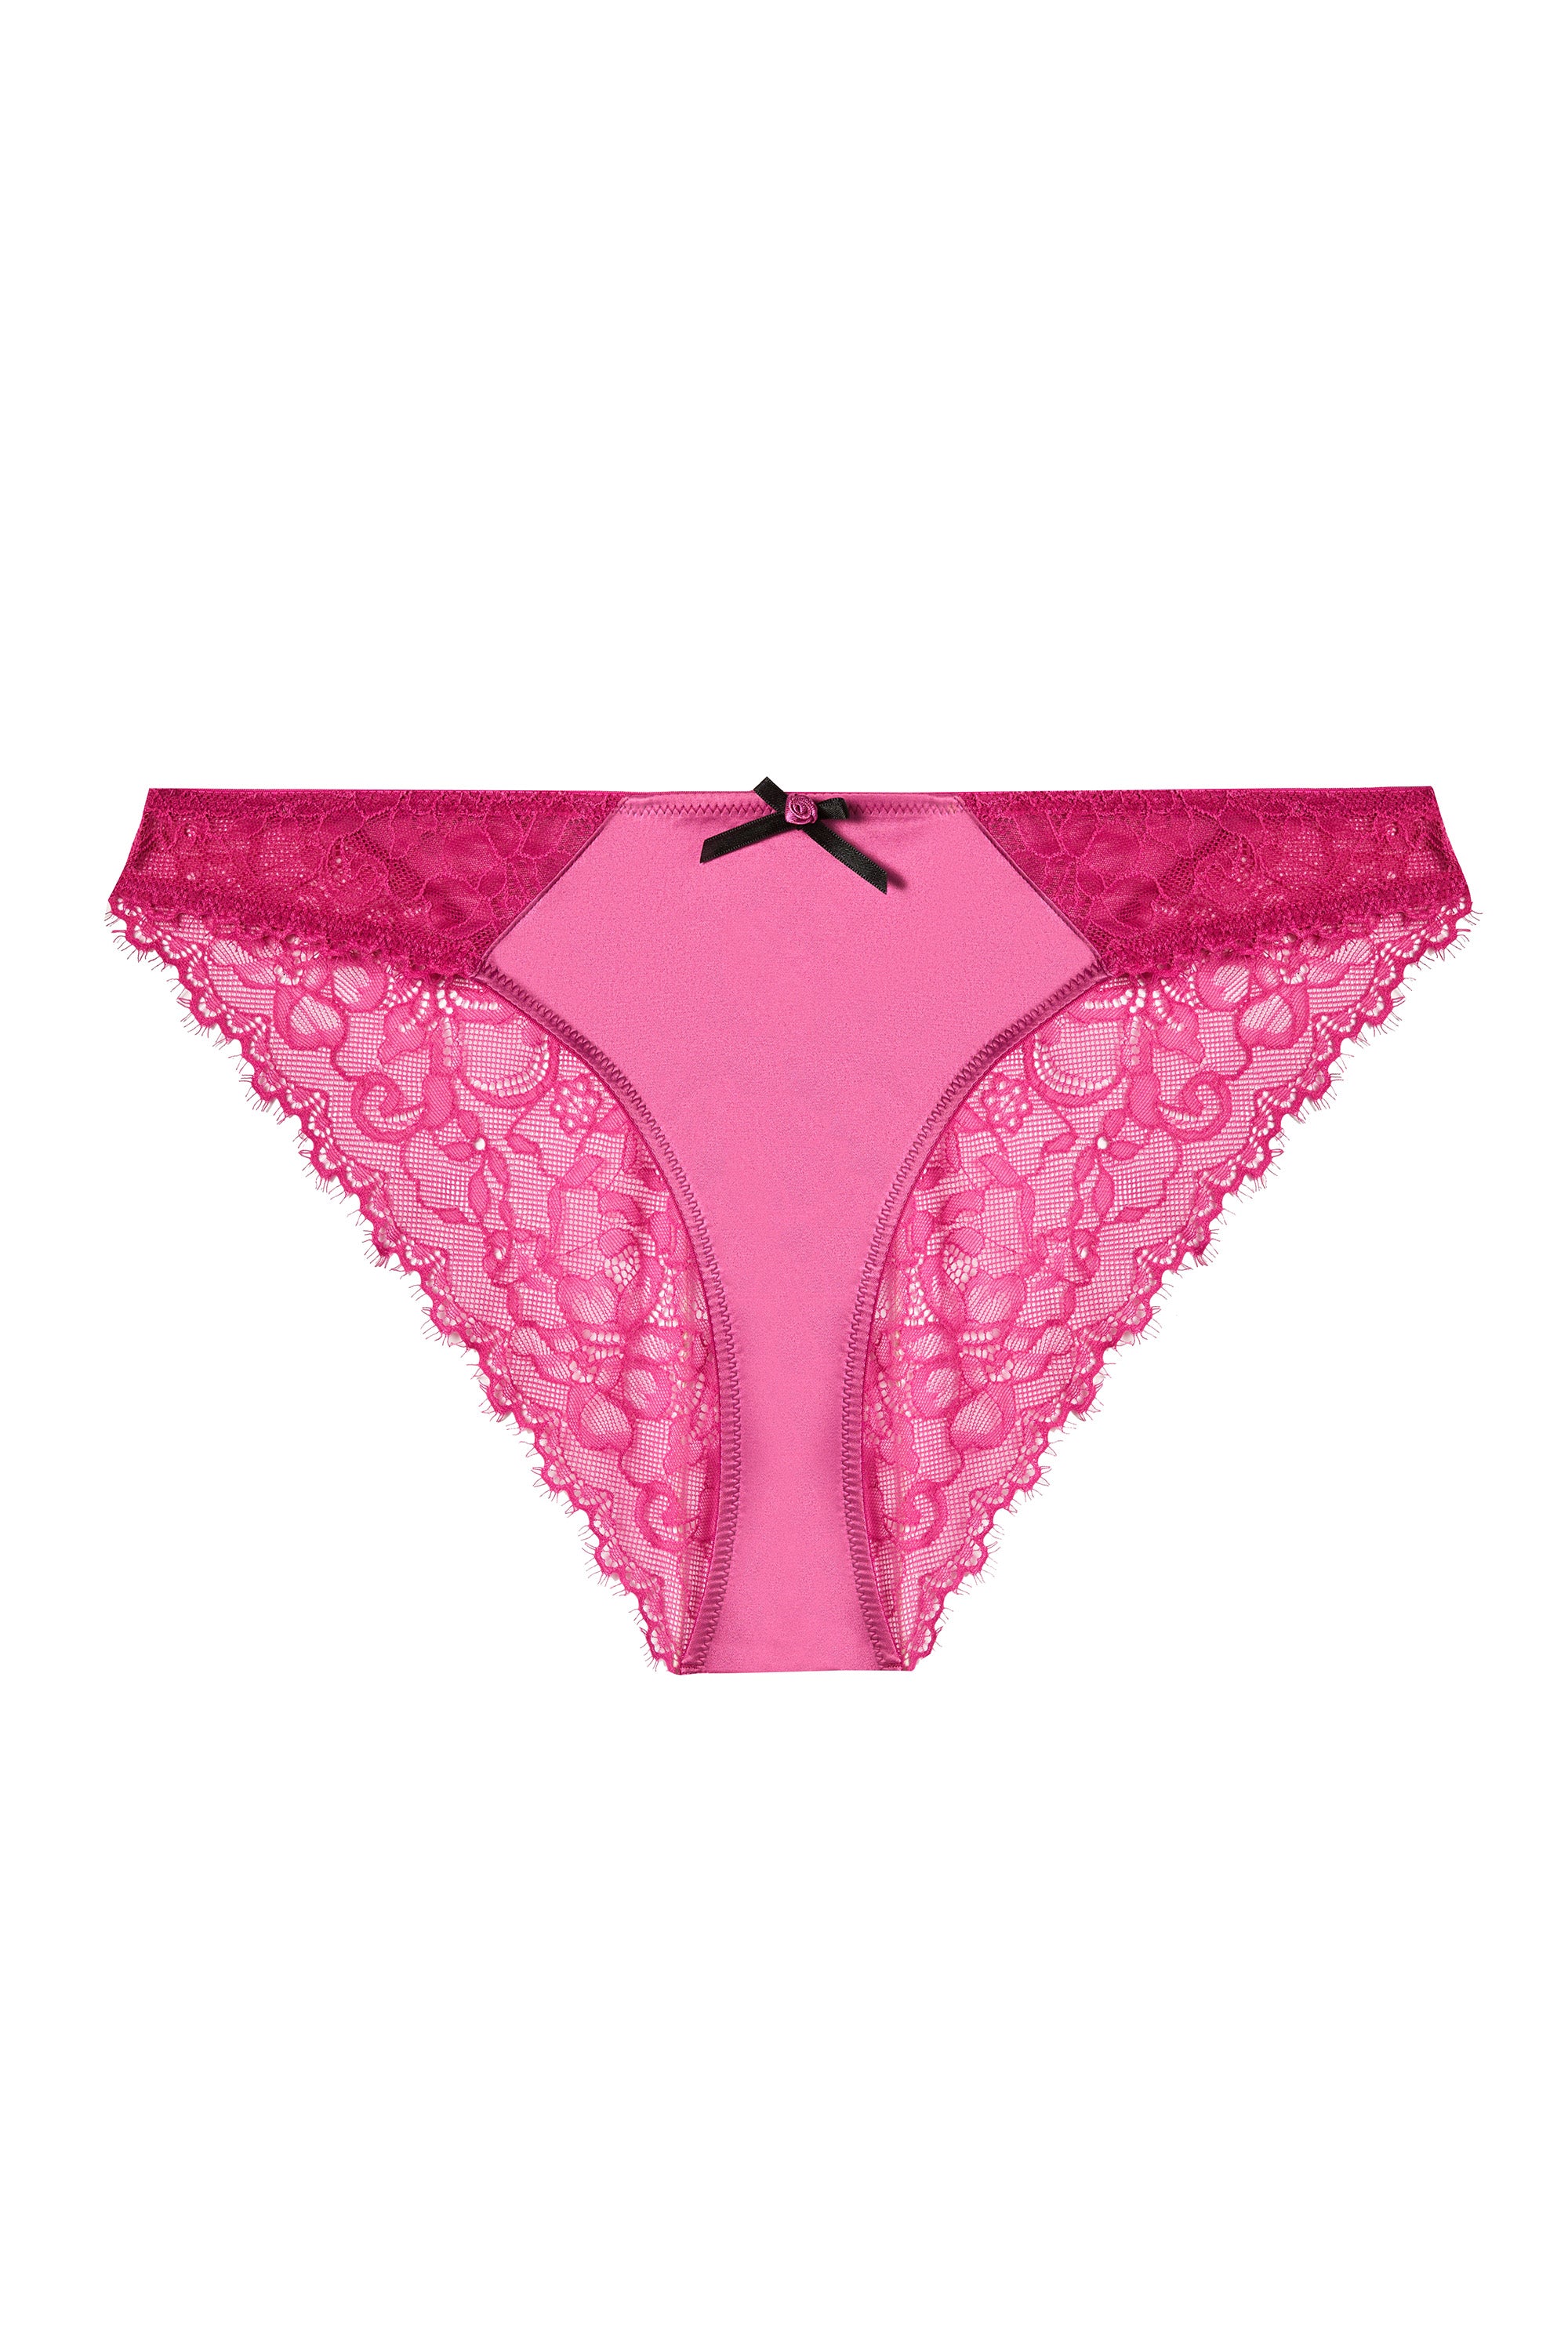 Cacique~New With Tags~Magenta Lace-Back Cheeky Panty~Size 14-16W (XL-0X)